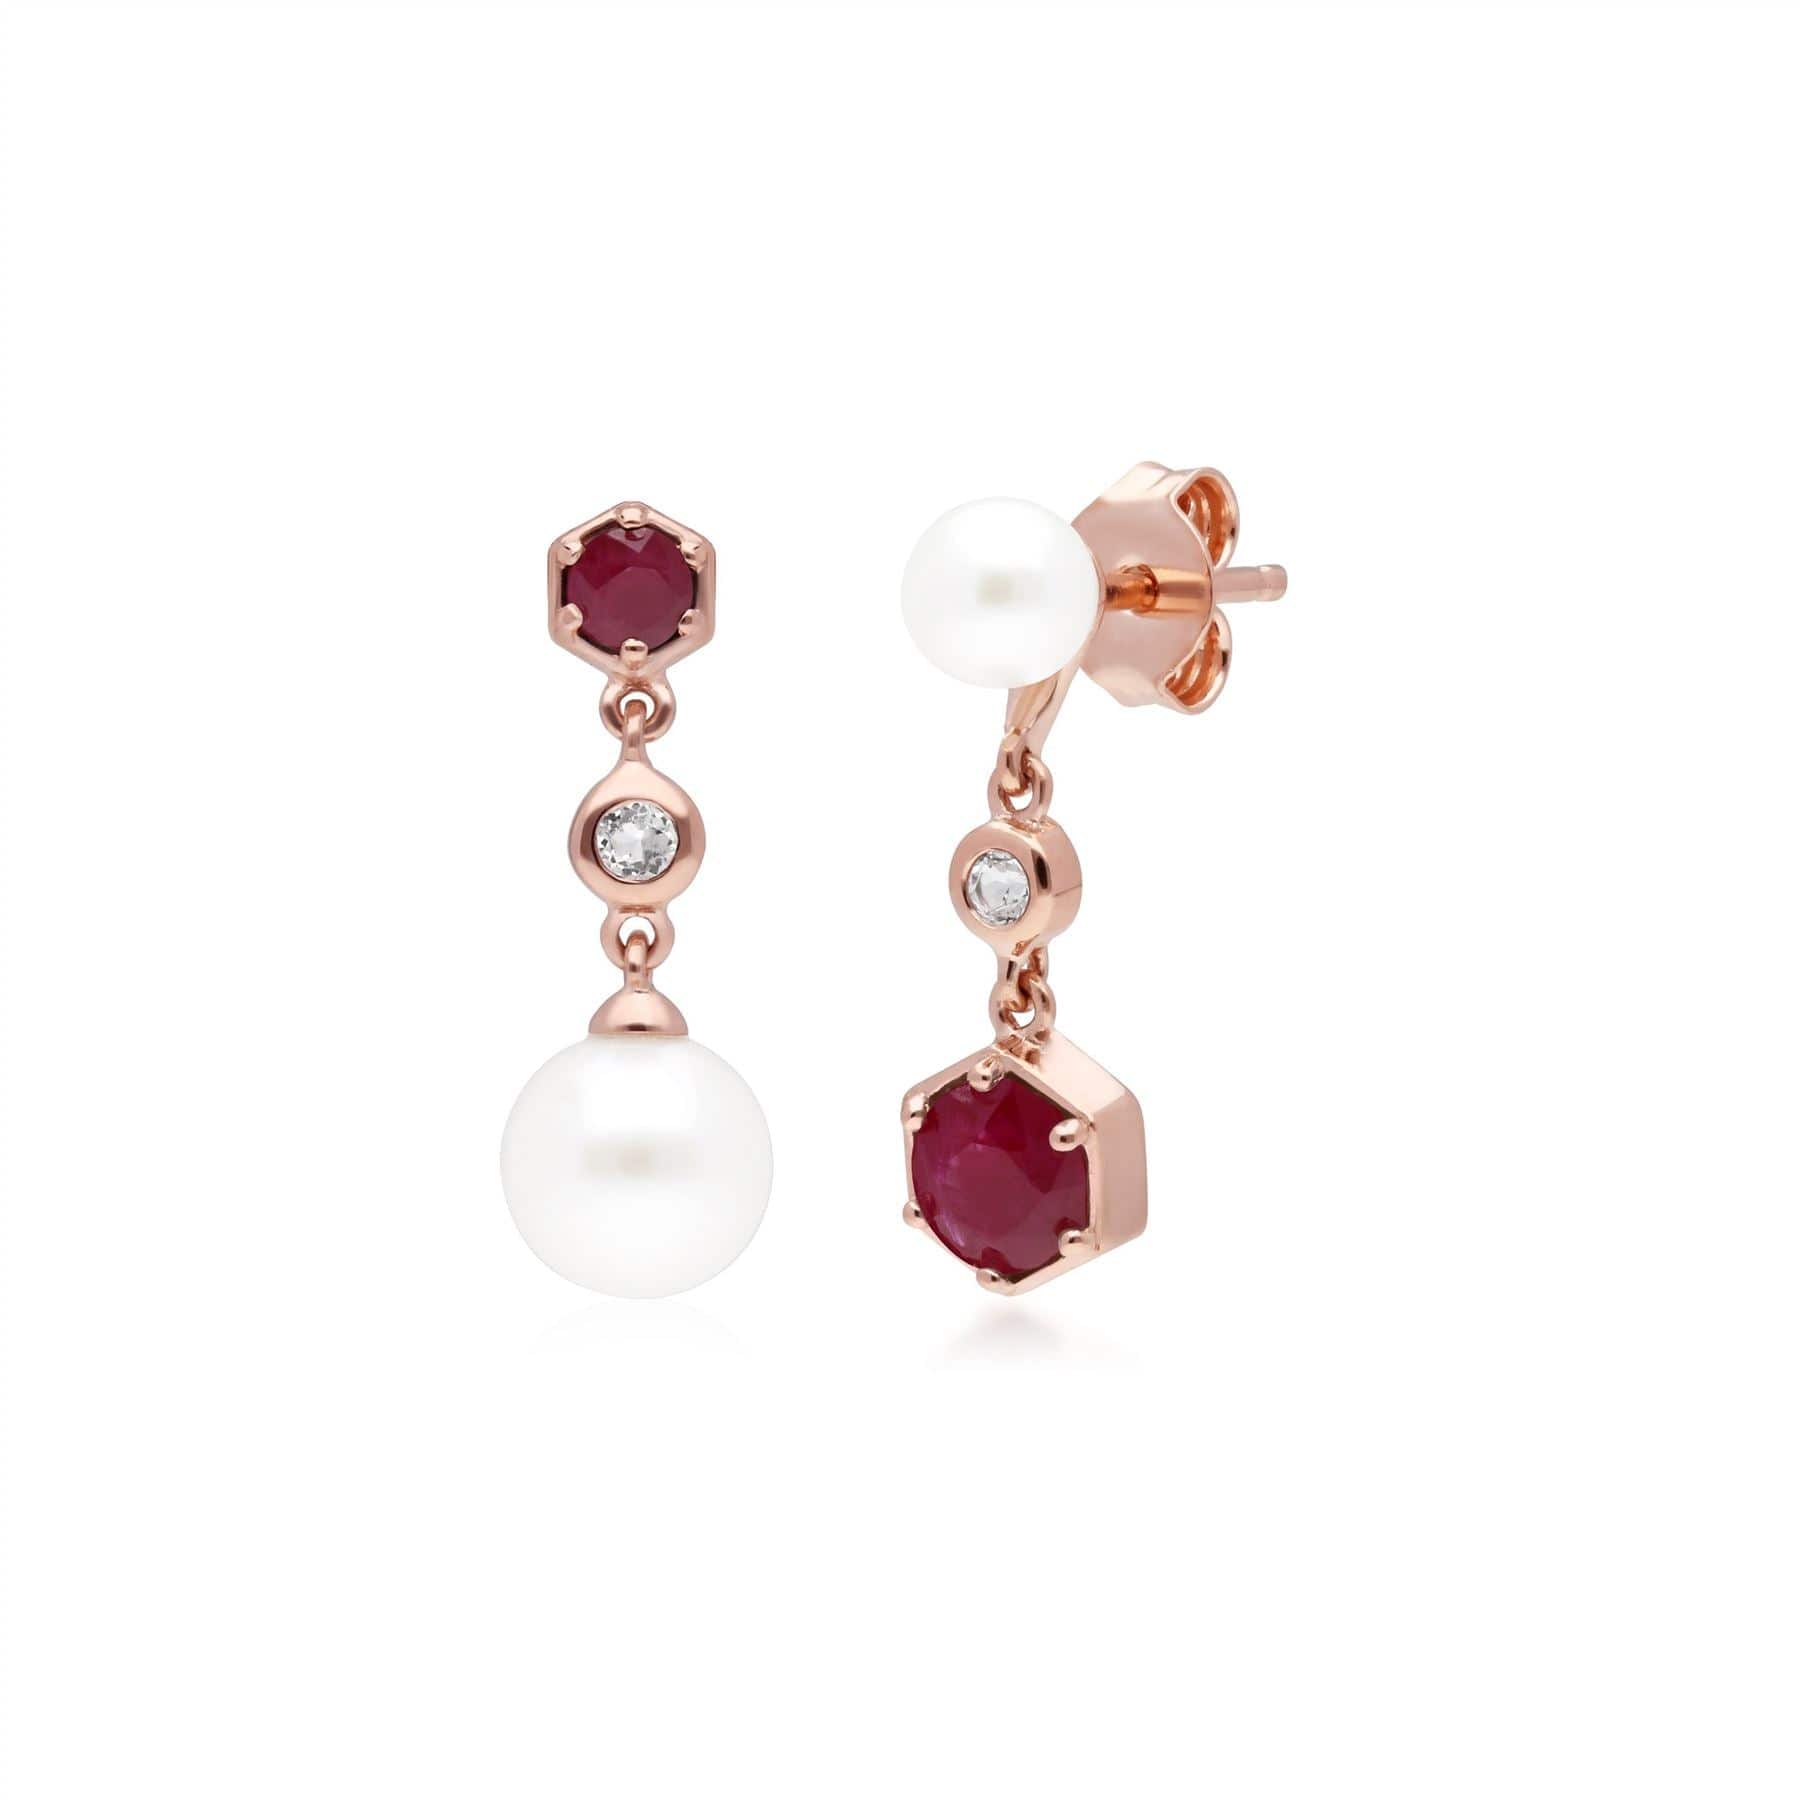 Modern Pearl, Ruby & Topaz Mismatched Drop Earrings in Rose Gold Plated Silver